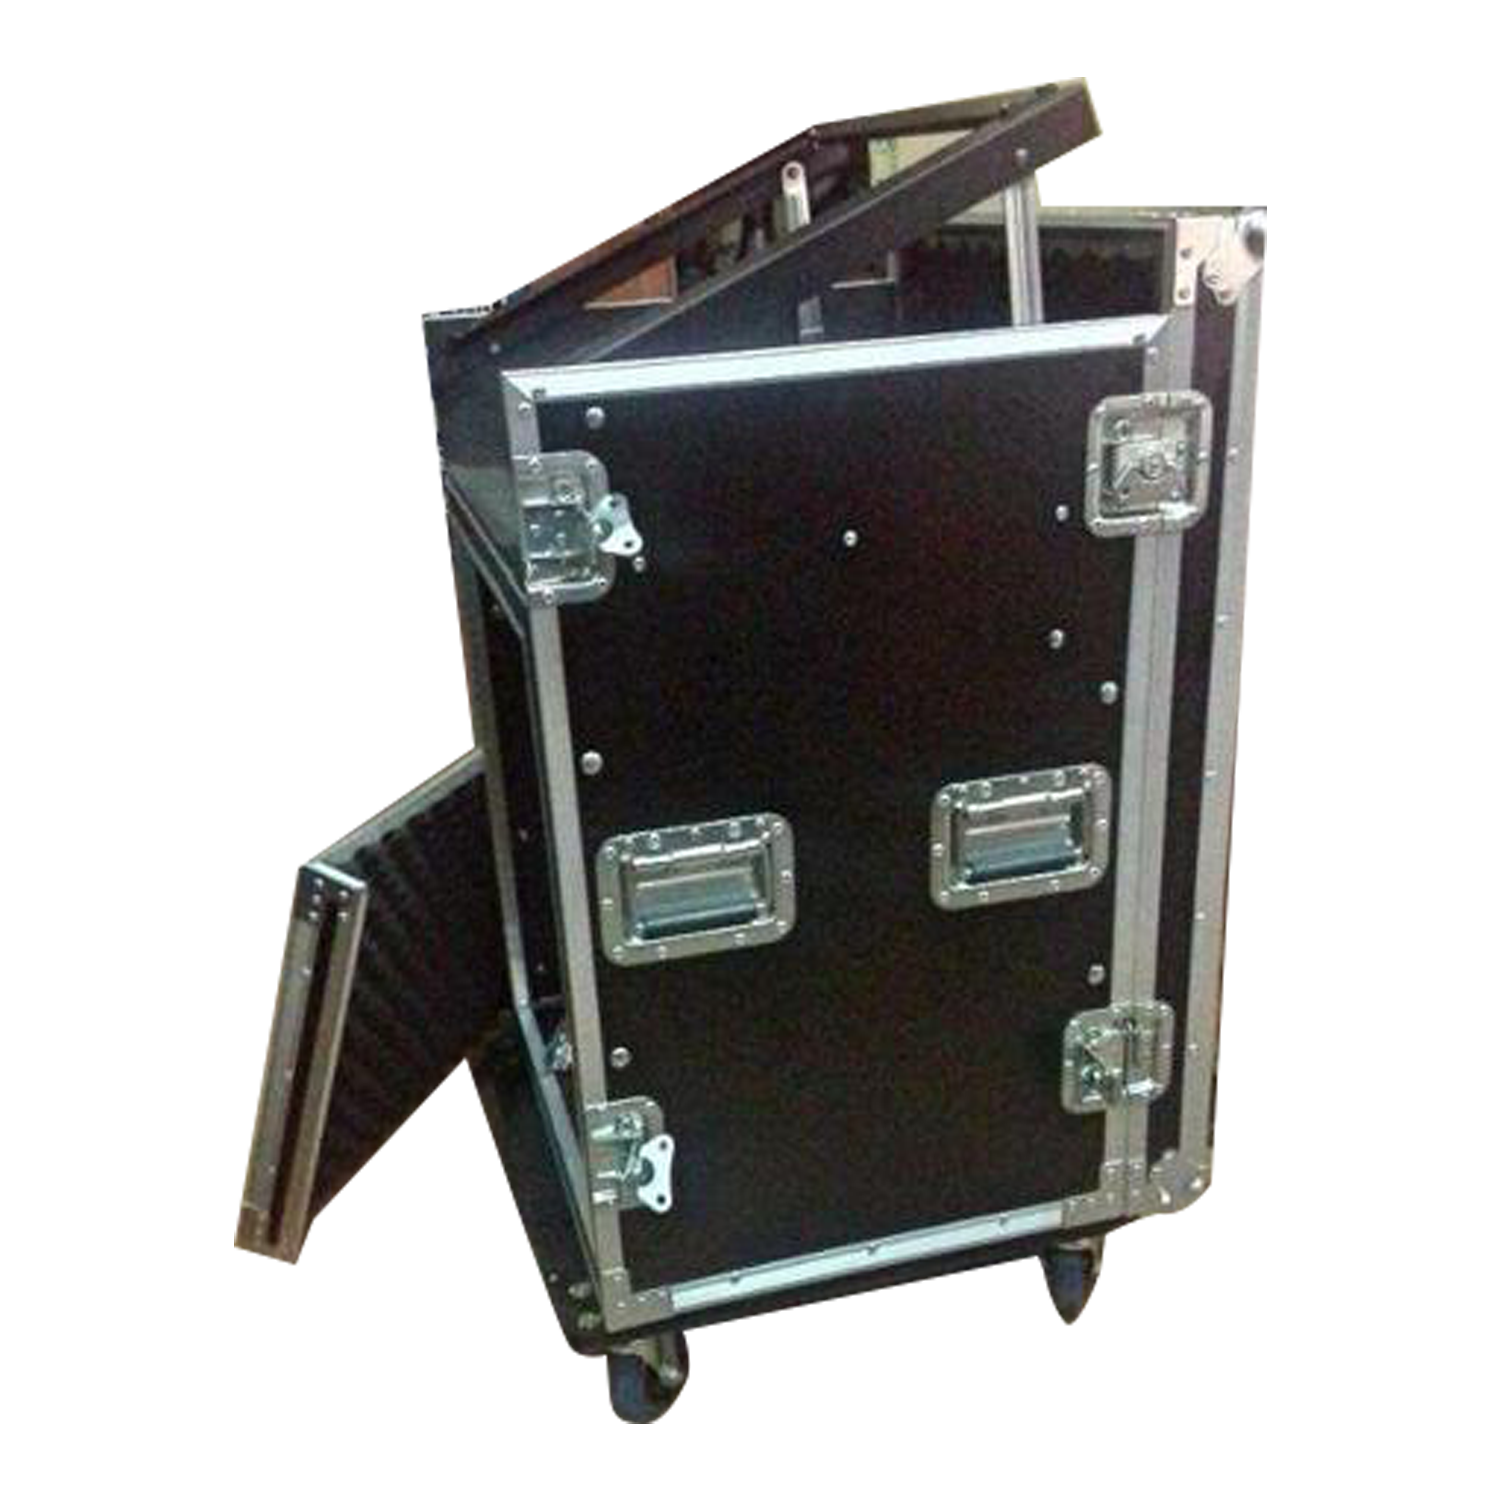 Three Lids with 4 Inches Castors Shockproof Combination Racks with Mixer   CA12U procase